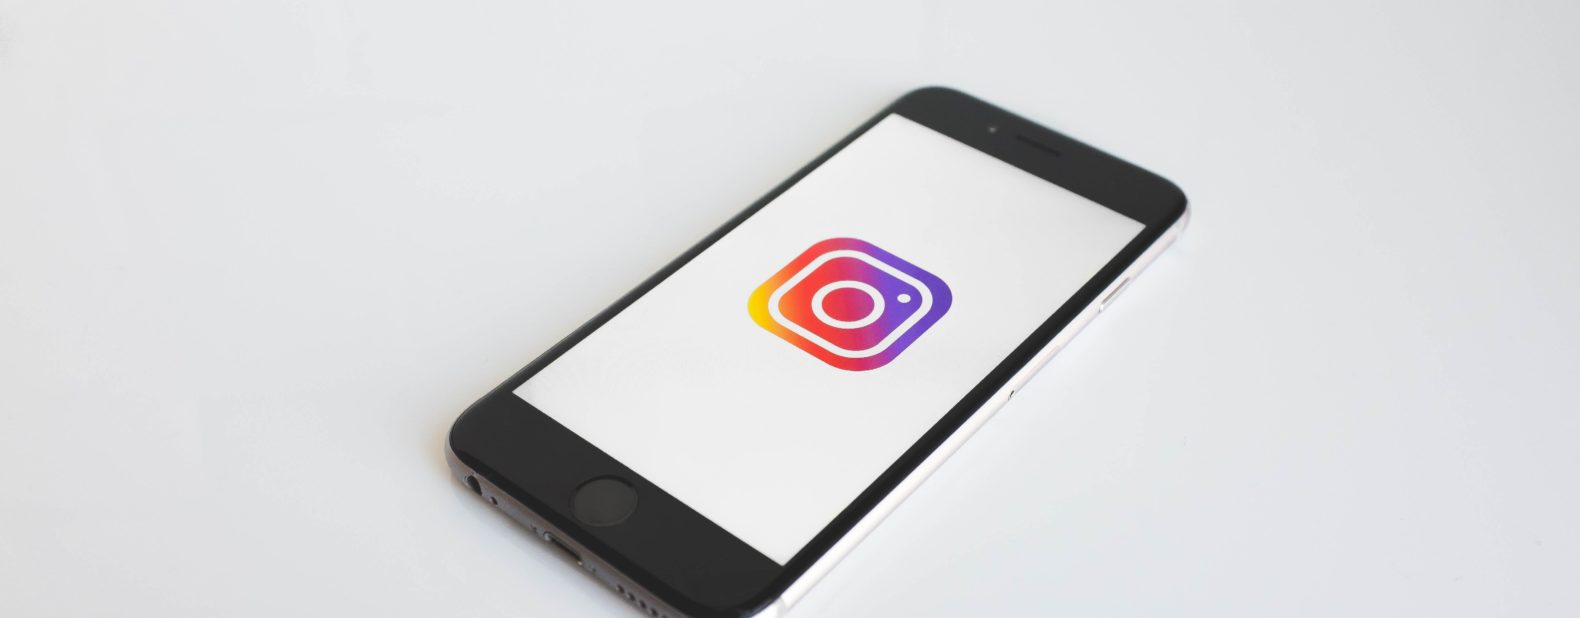 iphone with instagram photo on screen, PPC management, SEO services